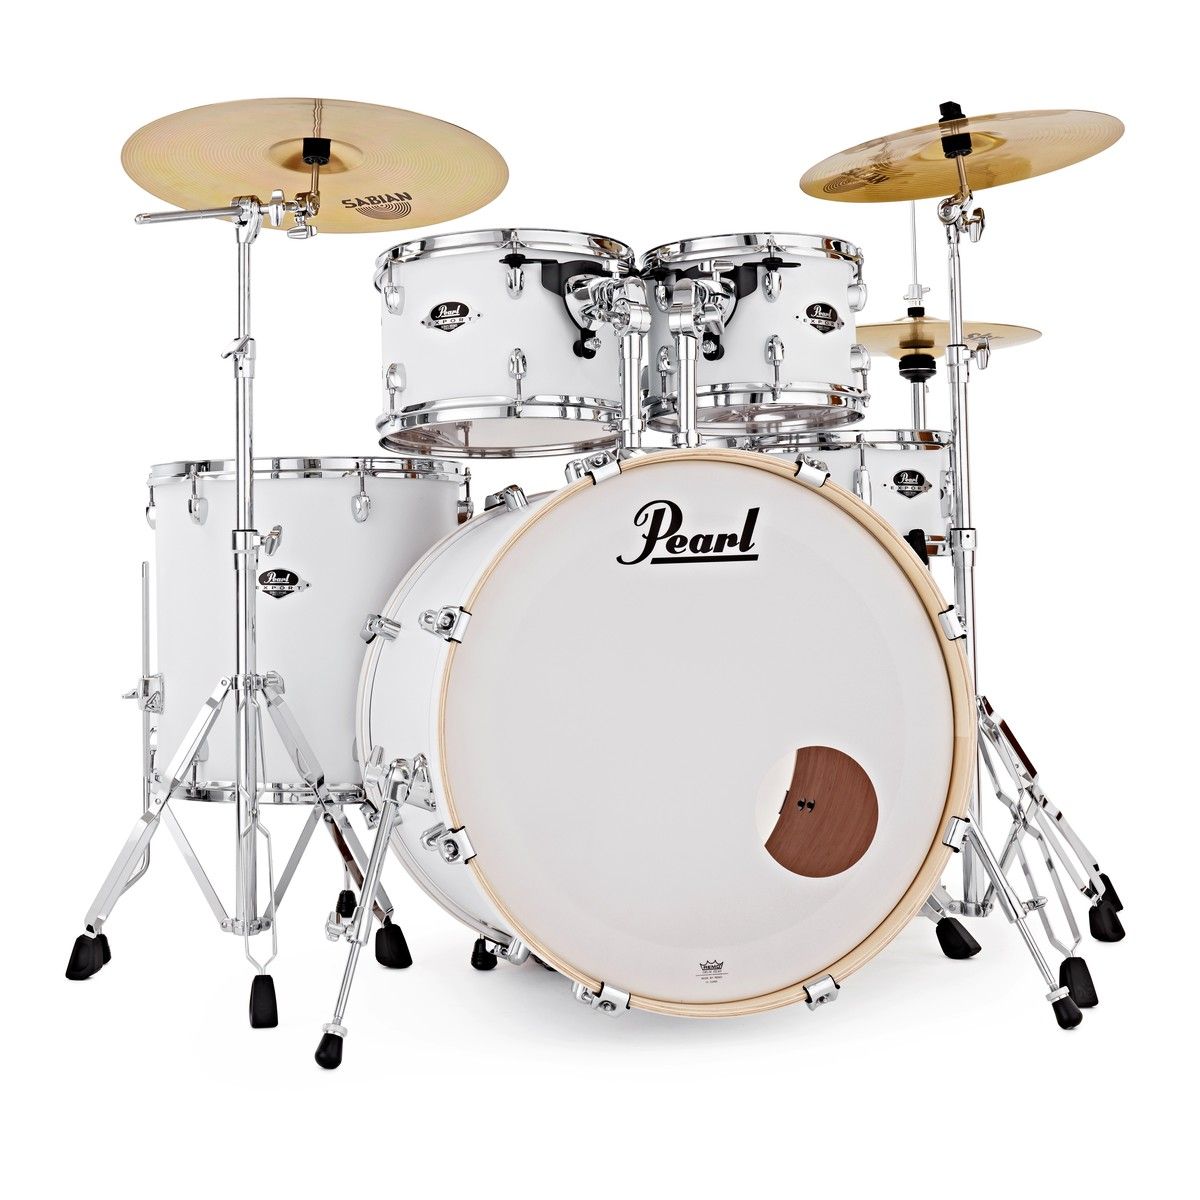  Pearl Export EXX725 ( Only Shell Pack ) 